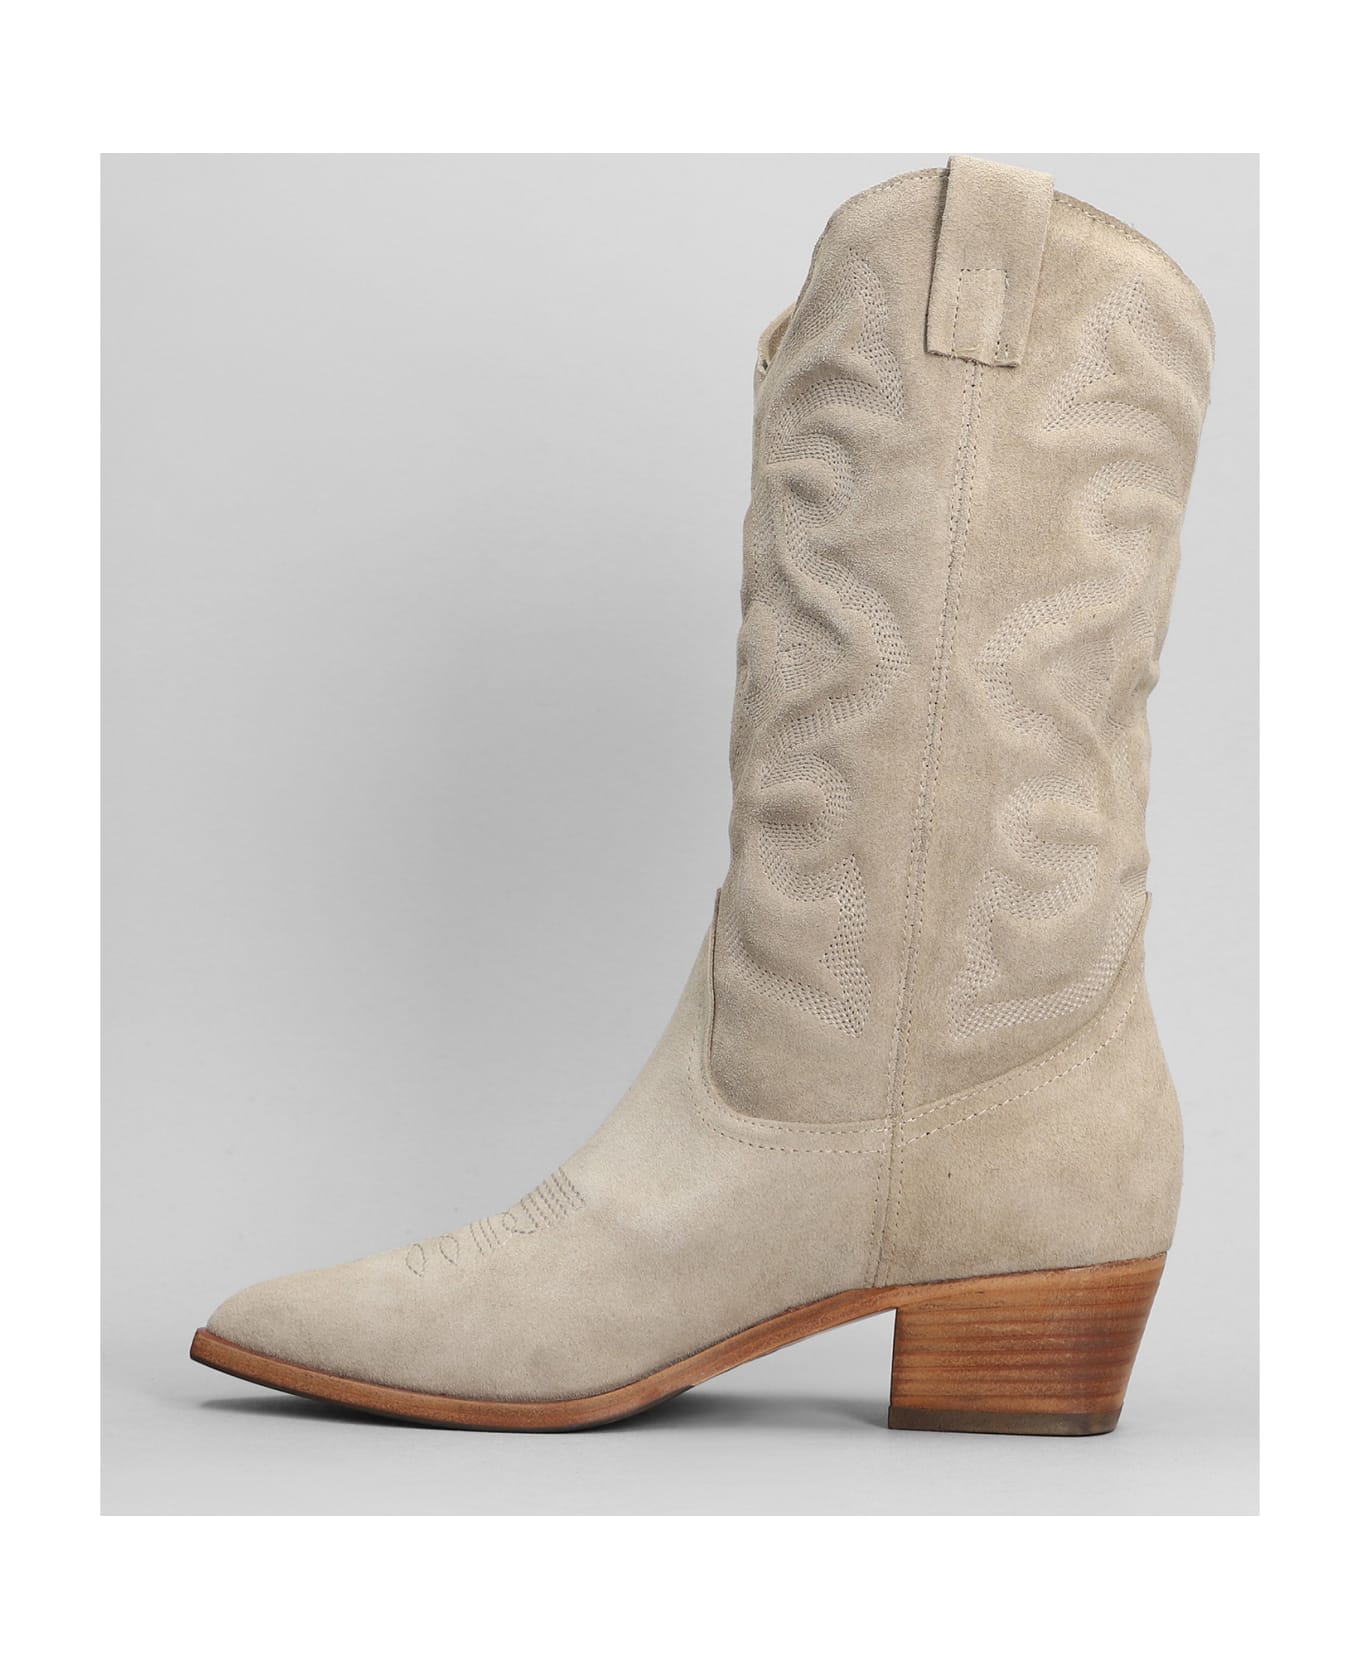 Julie Dee Texan Boots In Taupe Suede - taupe